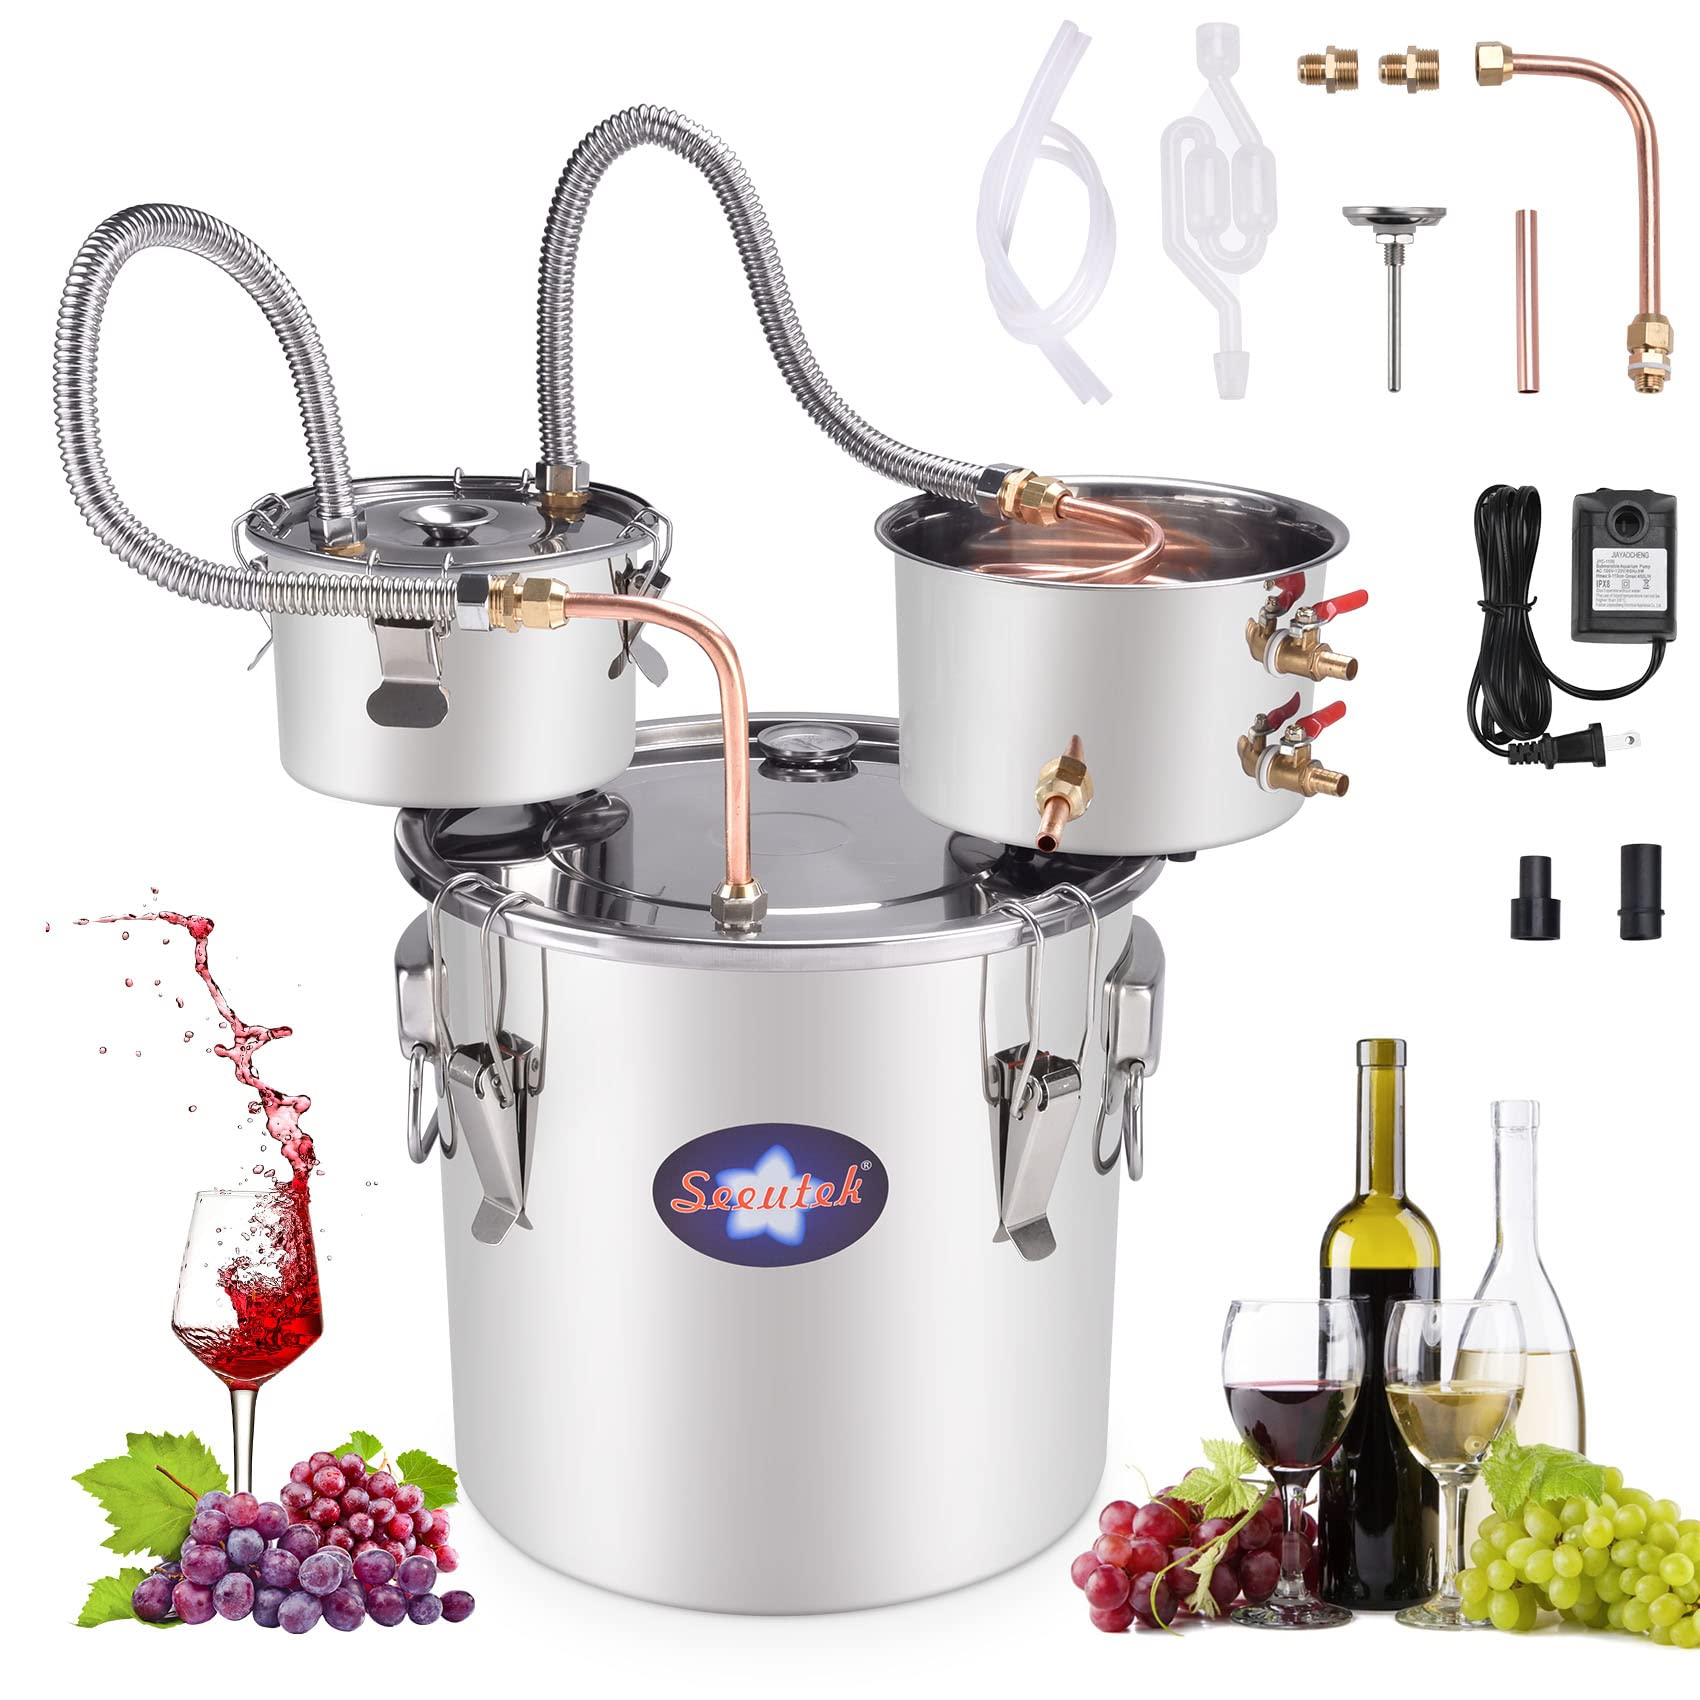 Suteck Alcohol Still 13.2Gal 50L Stainless Steel Alcohol Distiller Copper Tube Spirit Boiler W/Thumper Keg and Build-in Thermometer for Home Brewing and DIY Whisky Wine Brandy Making, Included Pump